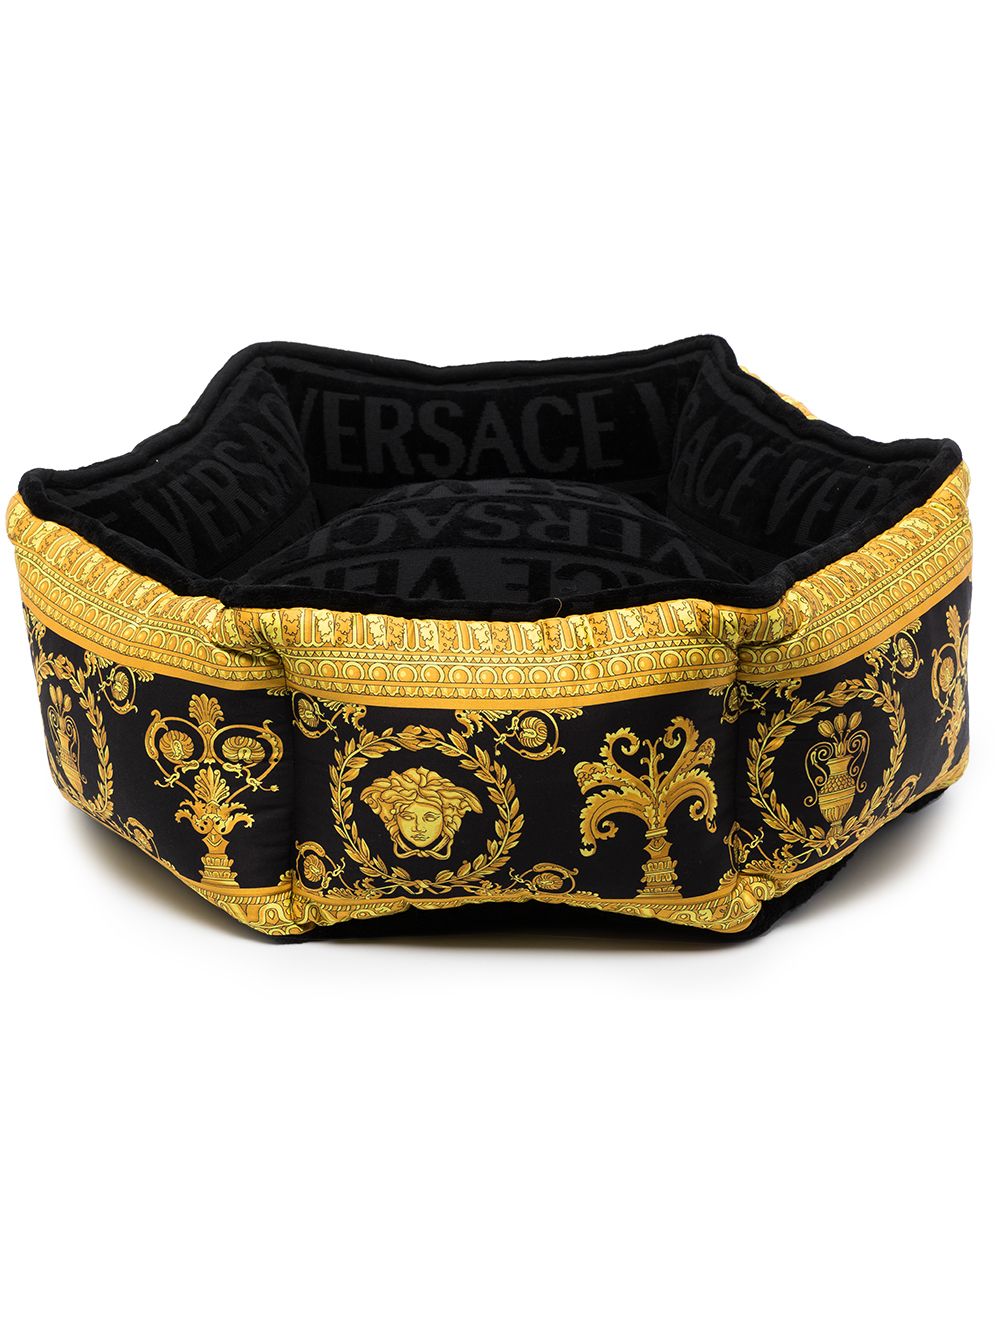 Image 2 of Versace small I Love Baroque pet bed